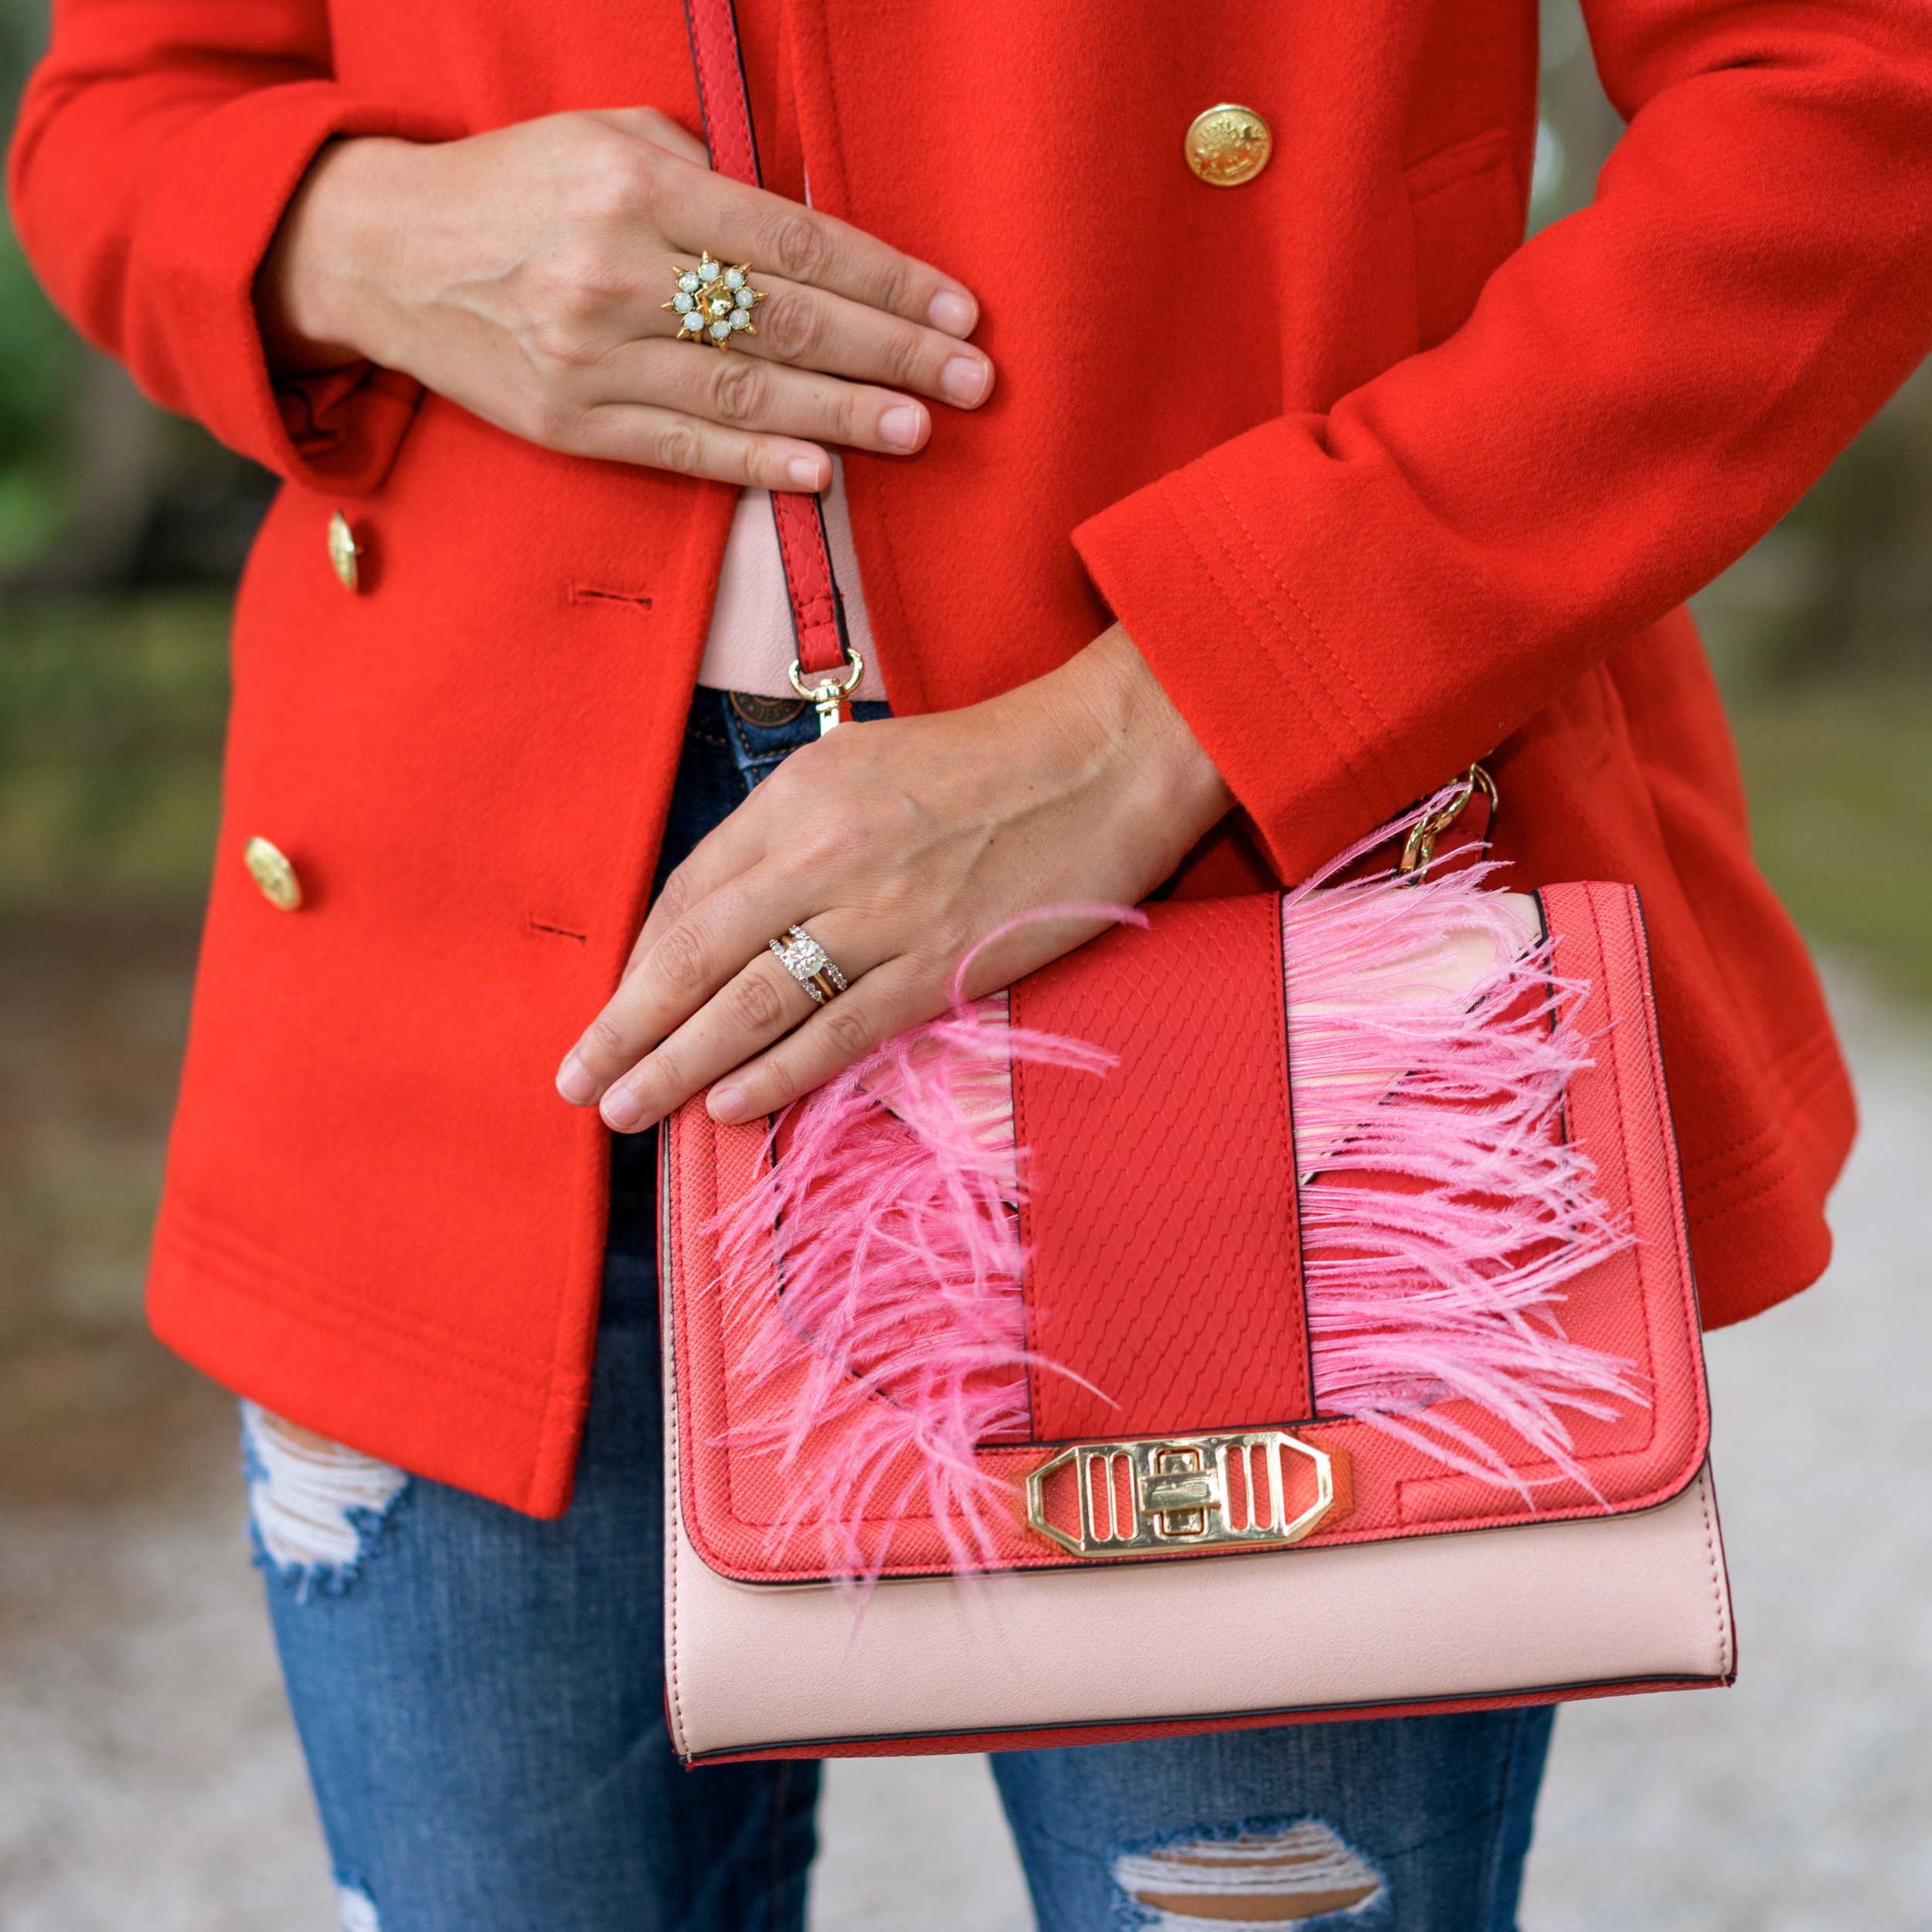 Today's Everyday Fashion: The Red Coat — J's Everyday Fashion